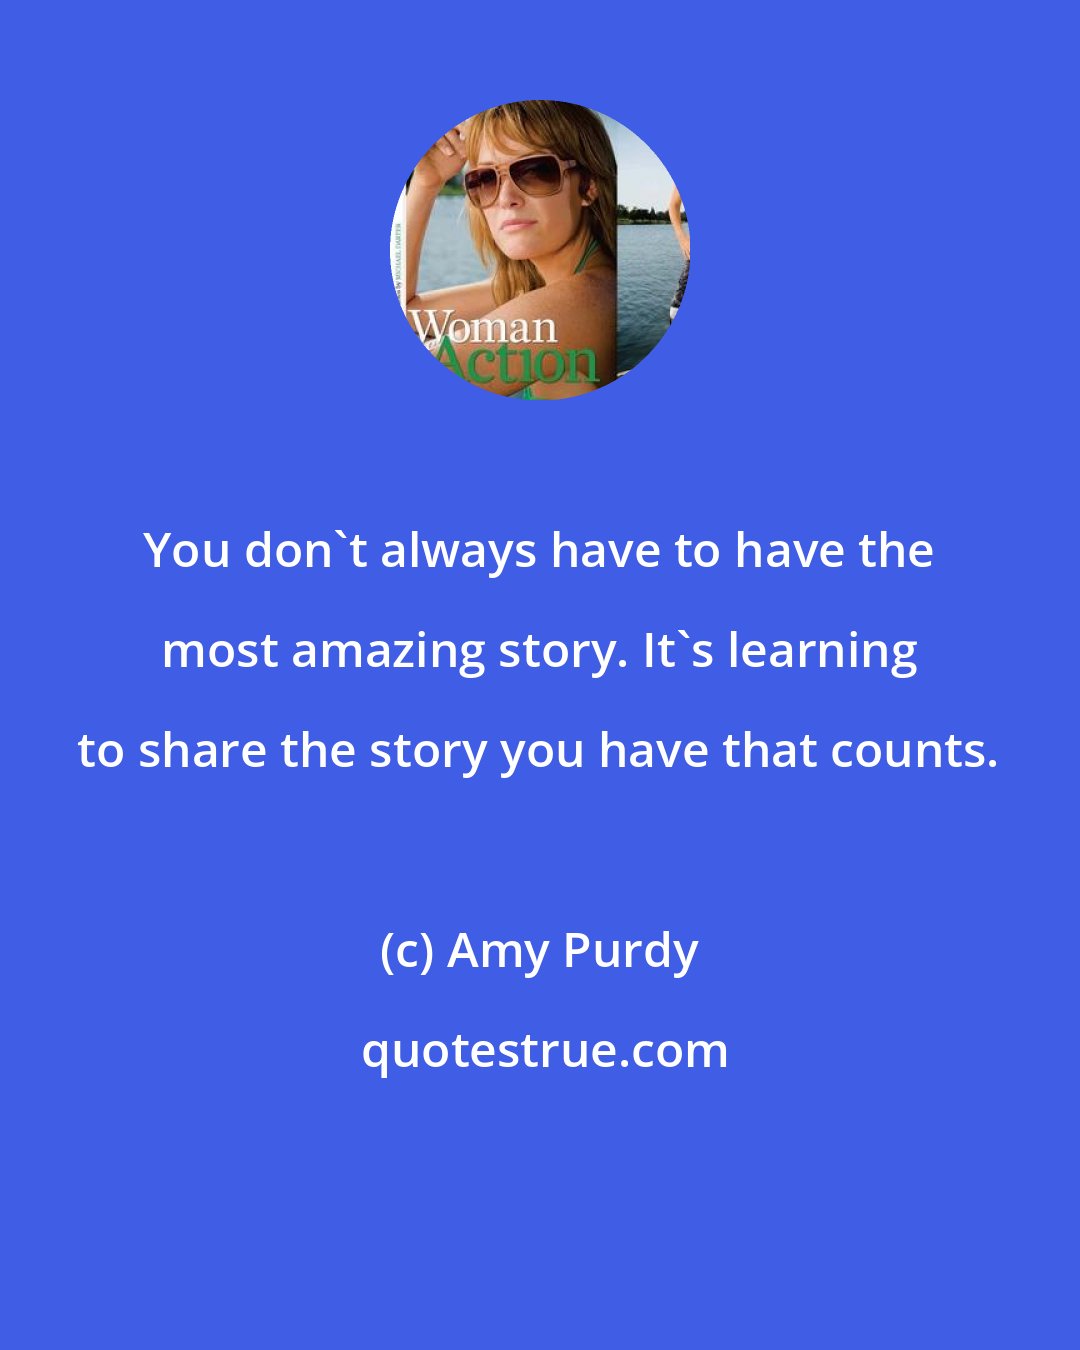 Amy Purdy: You don't always have to have the most amazing story. It's learning to share the story you have that counts.